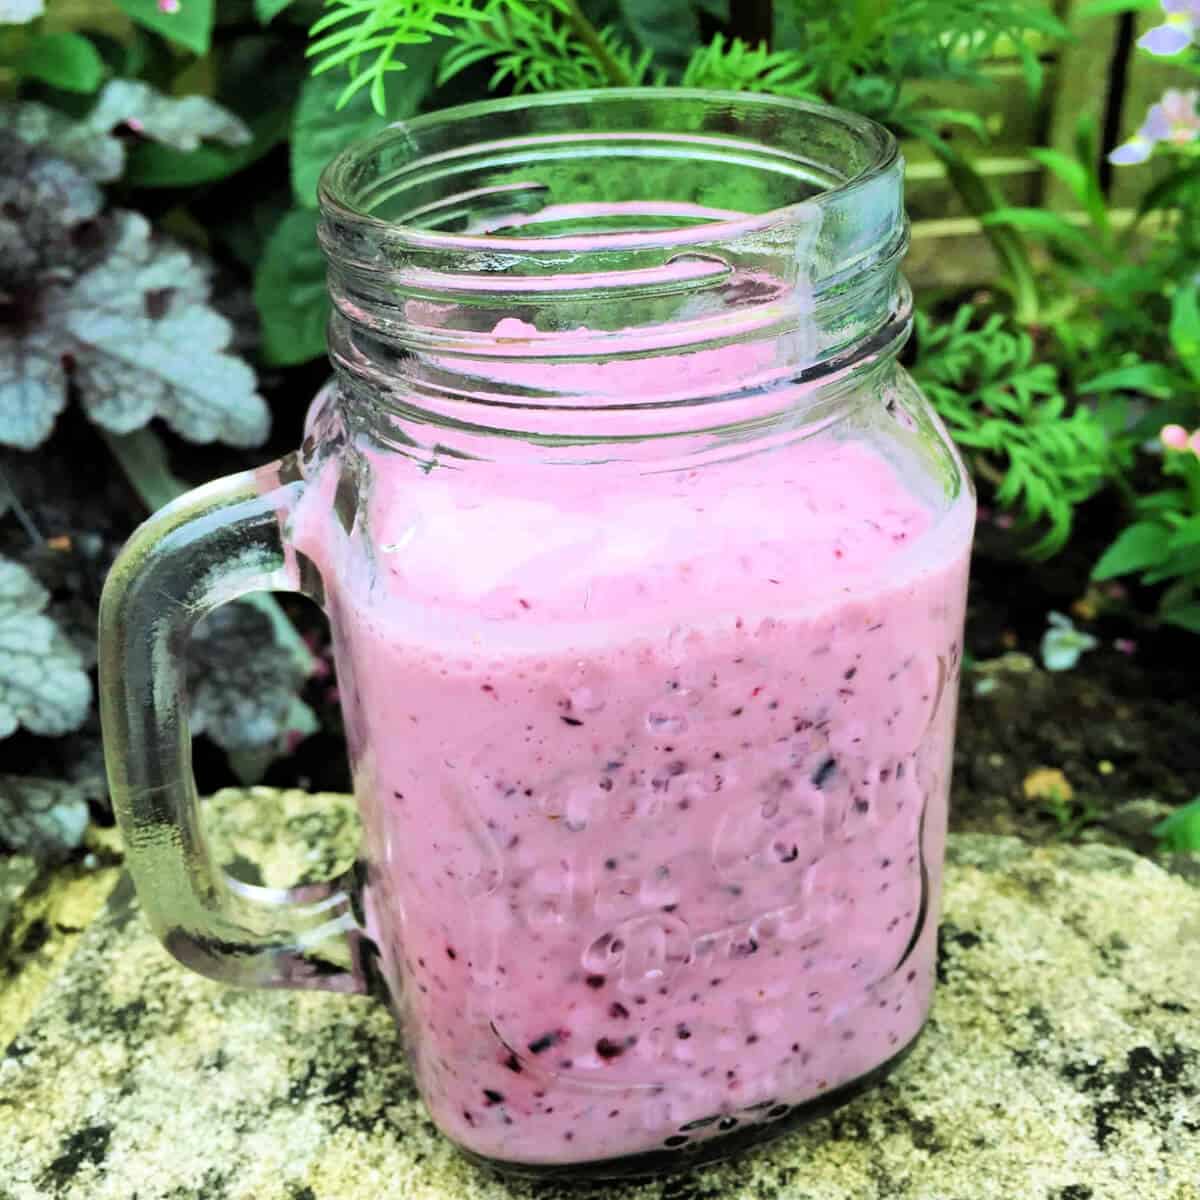 Smoothie in a jar with foliage behind.